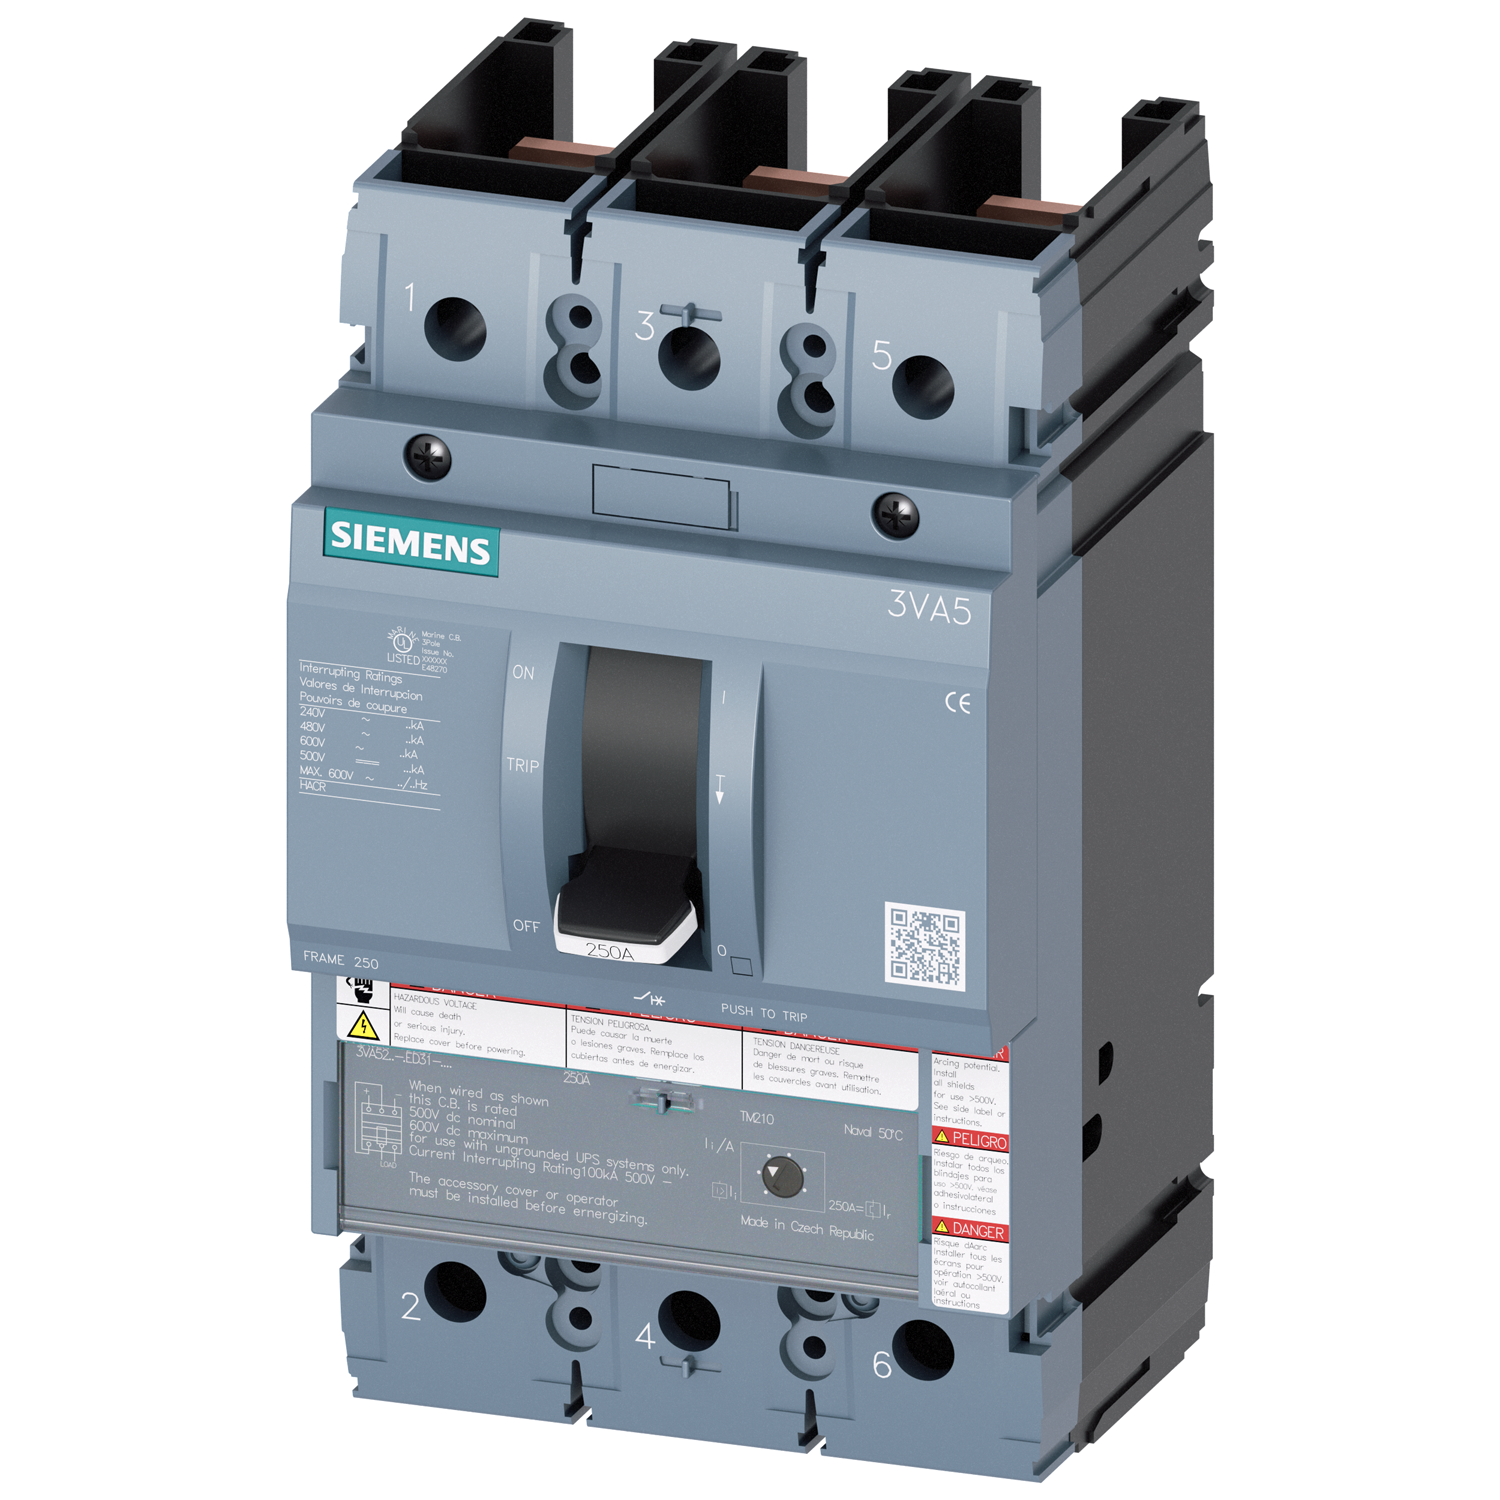 SIEMENS LOW VOLTAGE 3VA UL MOLDED CASE CIRCUIT BREAKER WITH THERMAL - MAGNETIC TRIP UNIT. 3VA52 FRAME WITH VERY HIGH (CLASS C) BREAKING CAPACITY. 200A 3-POLE (35KAIC AT 600V) (100KAIC AT 480V). TM230 TRIP UNIT WITH FIXED Ir ADJUSTABLE Ii. SPECIAL FEATURES WITHOUT LUGS NAVAL RATED 50C. DIMENSIONS (W x H x D) IN 4.1 x 7.3 x 4.2.